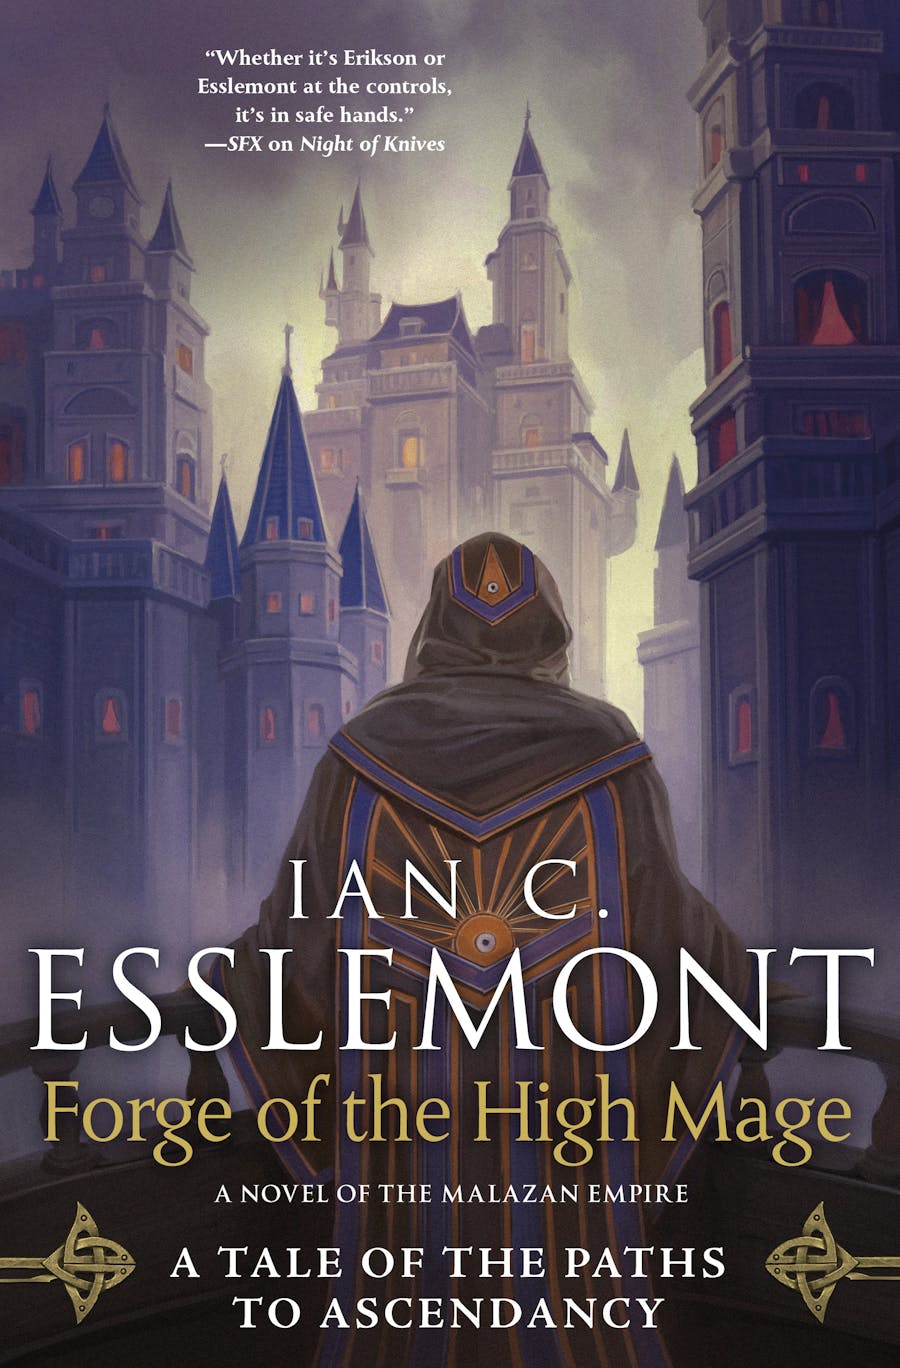 Ian C. Esslemont: Forge of the High Mage (Paperback, Macmillan)